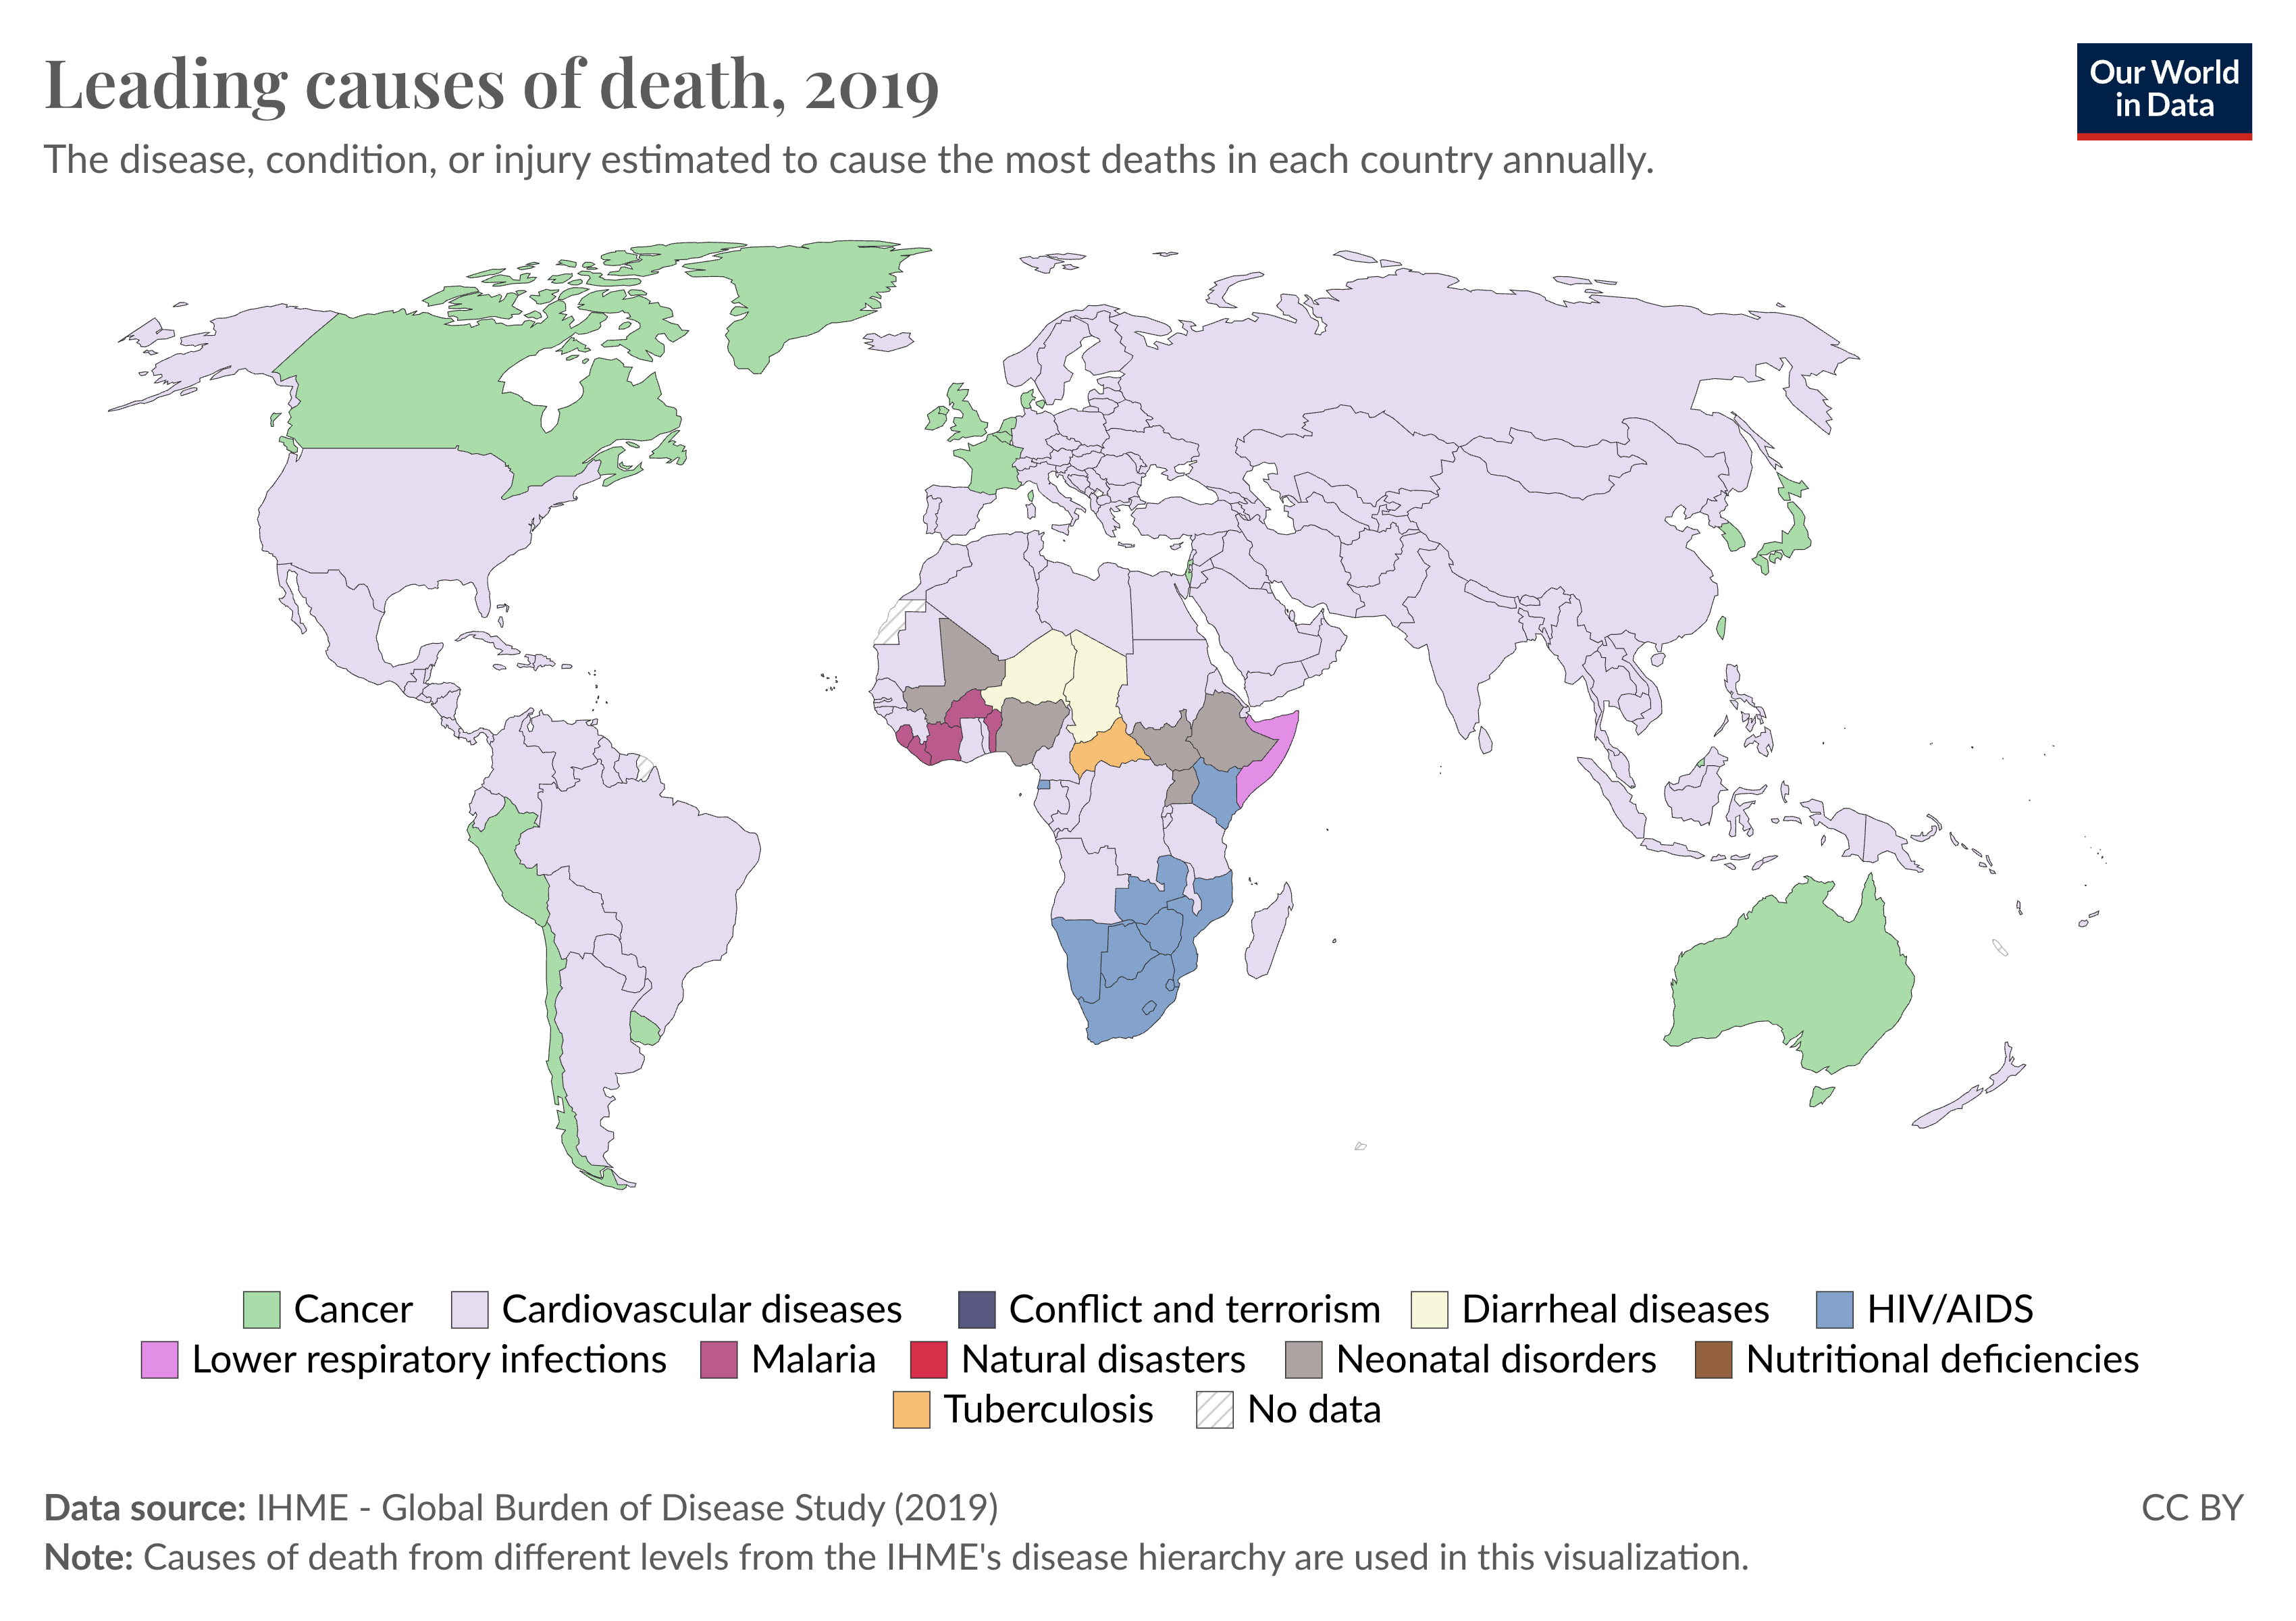 The leading cause of death in each country, shown on a map.